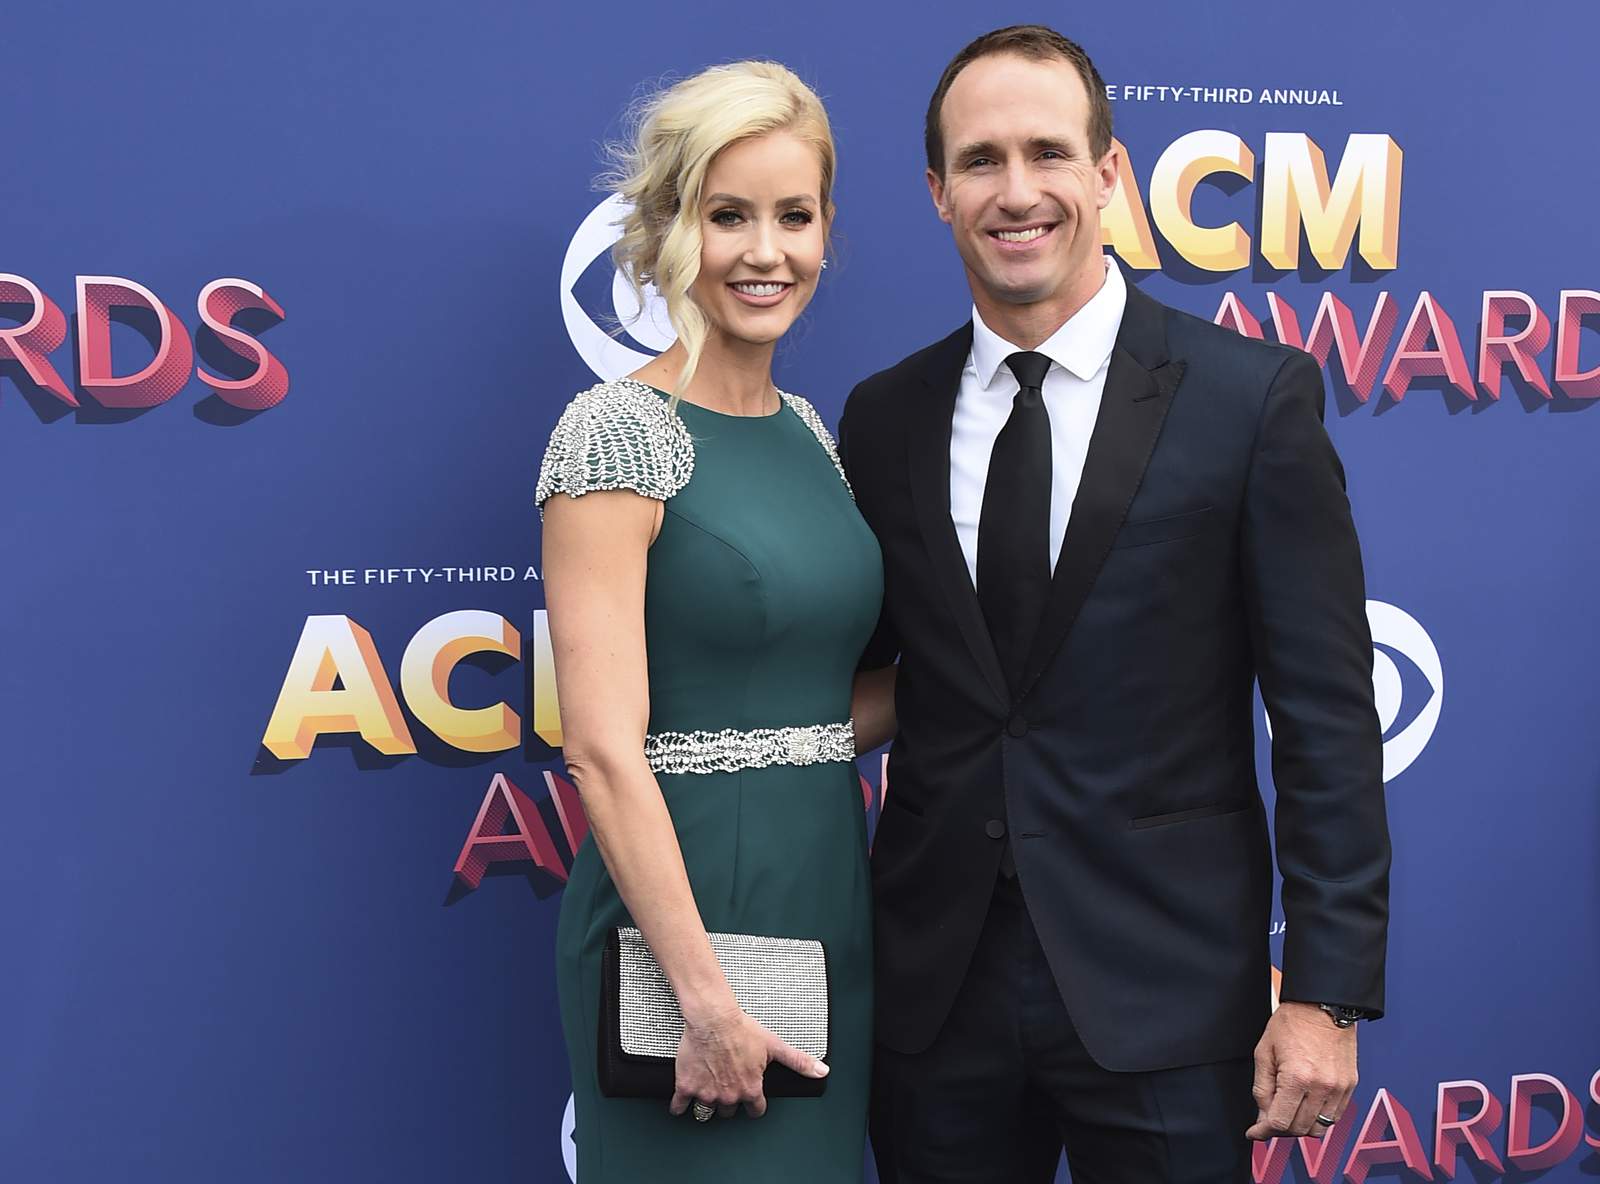 Drew Brees' wife apologizes for husband's comments on flag